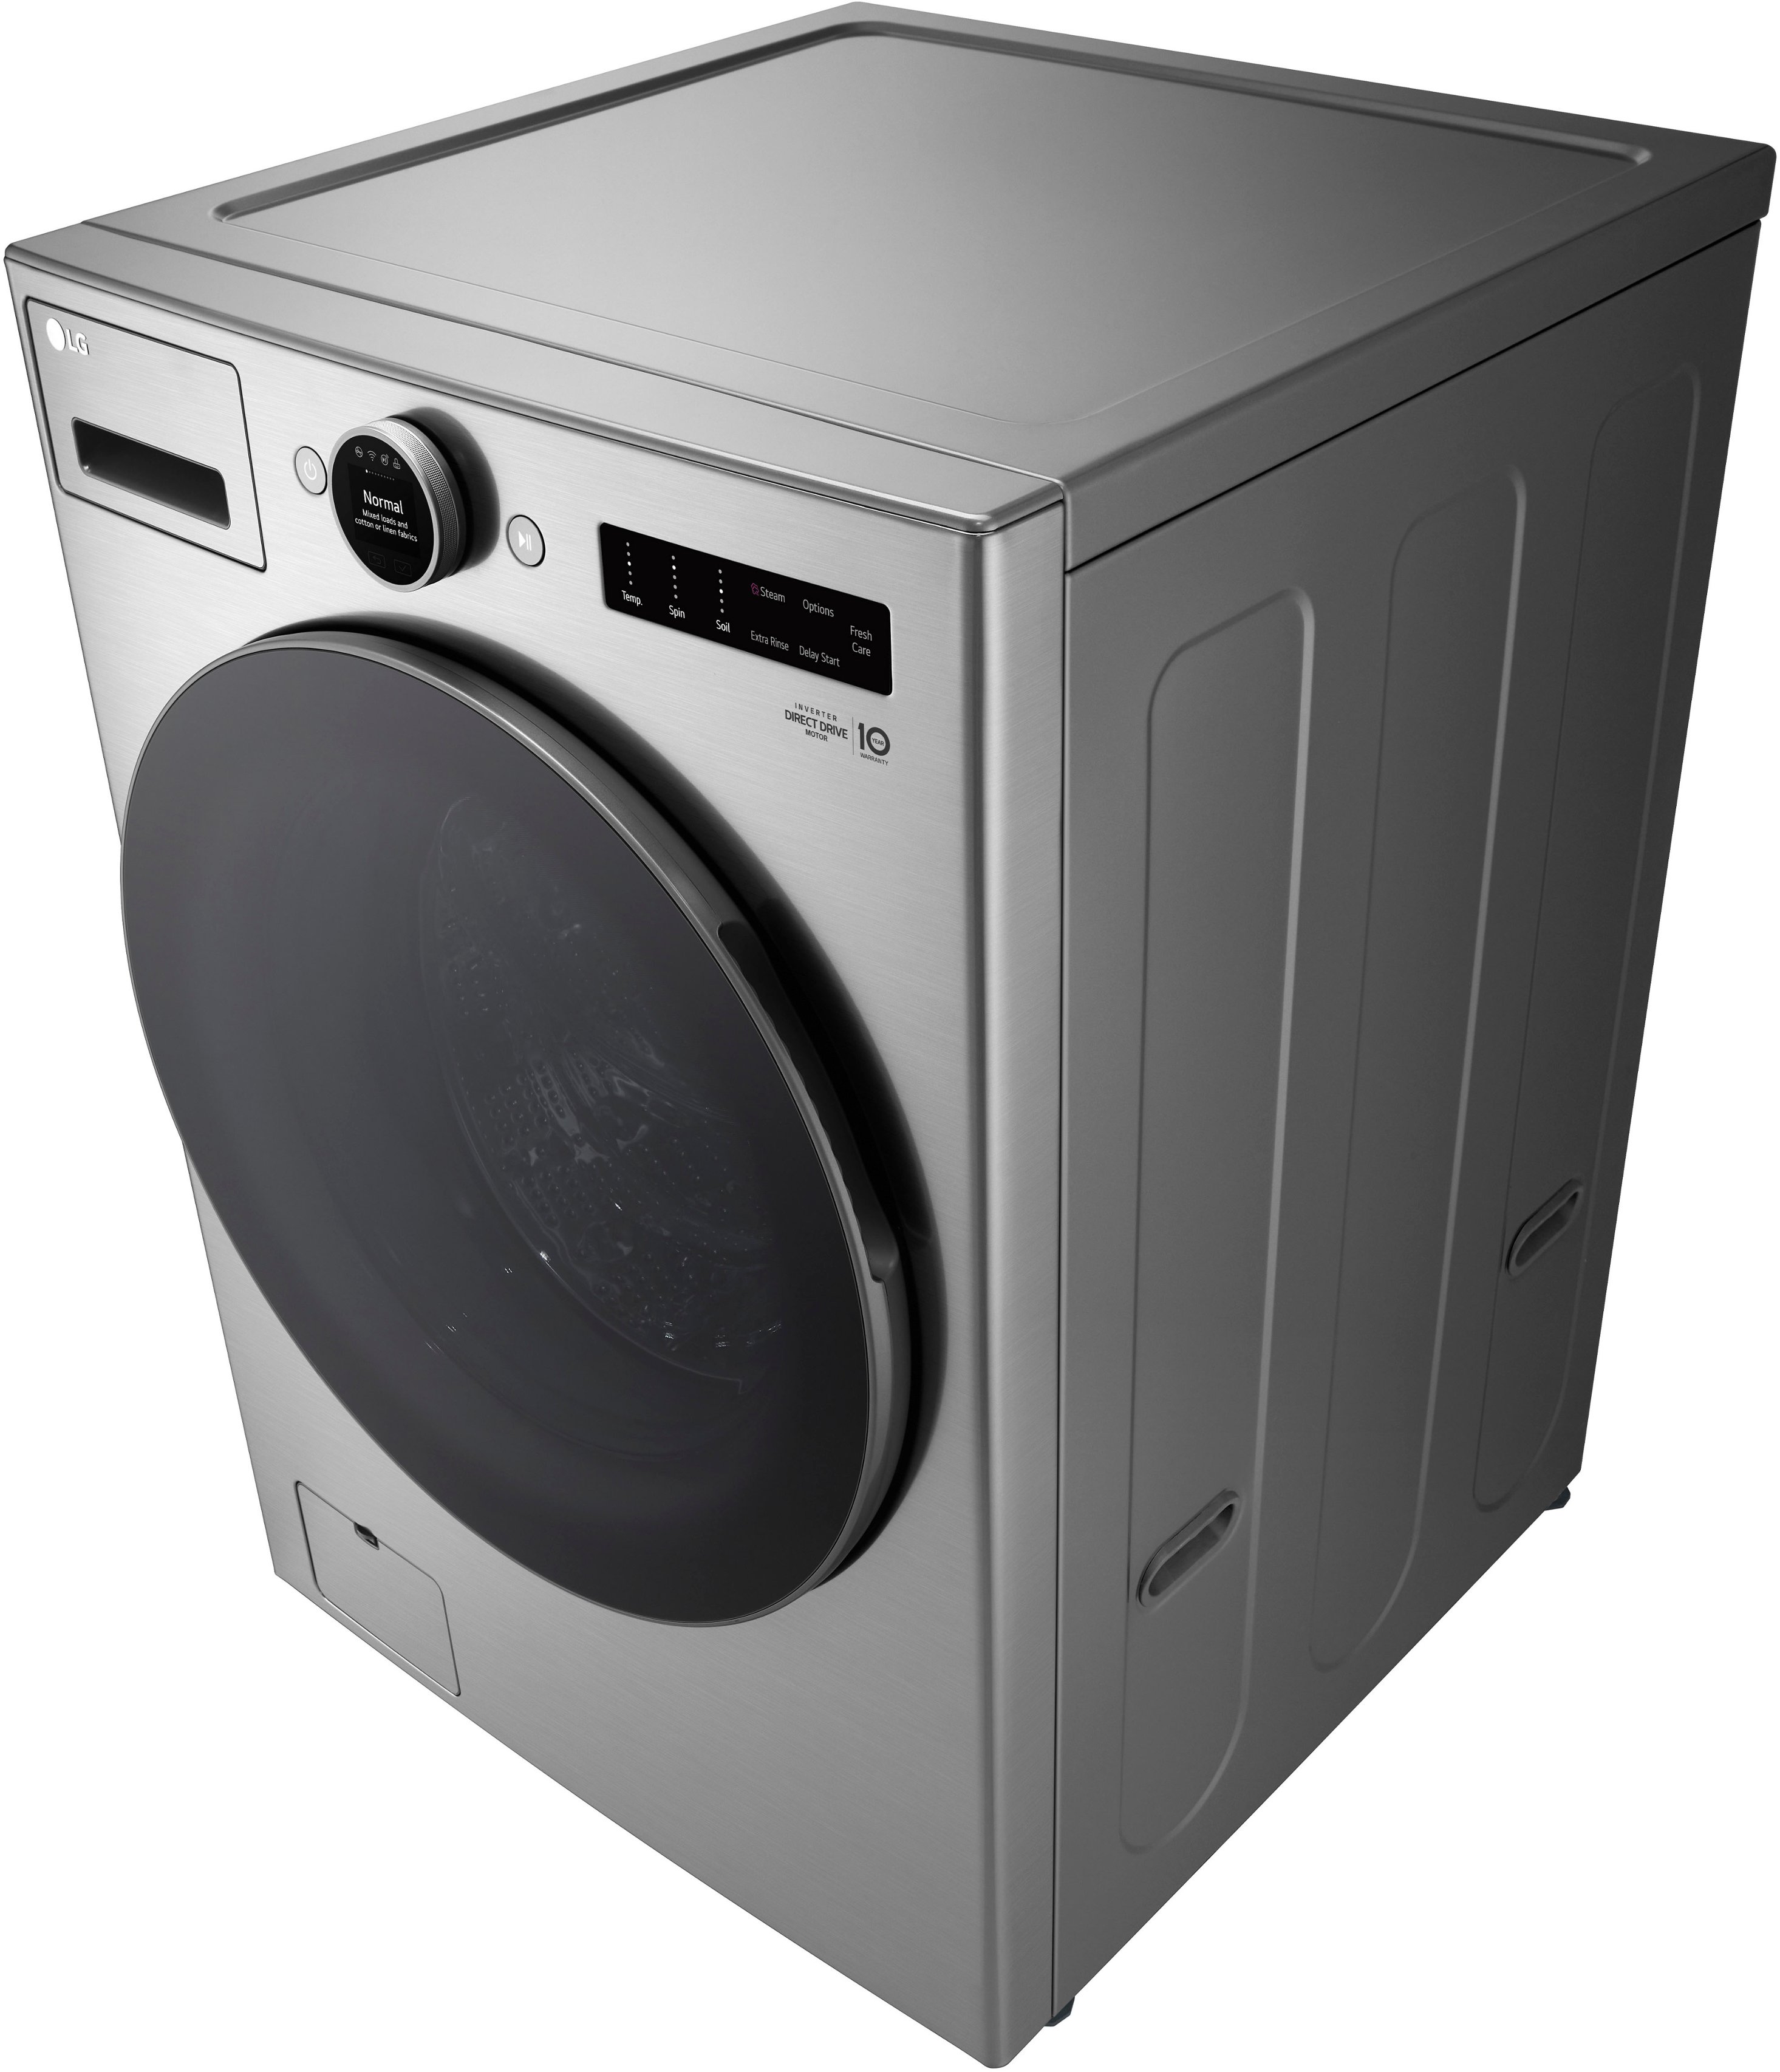 LG 4.5 cu. ft. Stackable SMART Front Load Washer in Graphite Steel with  TurboWash 360 and Allergiene Steam Cleaning WM5500HVA - The Home Depot